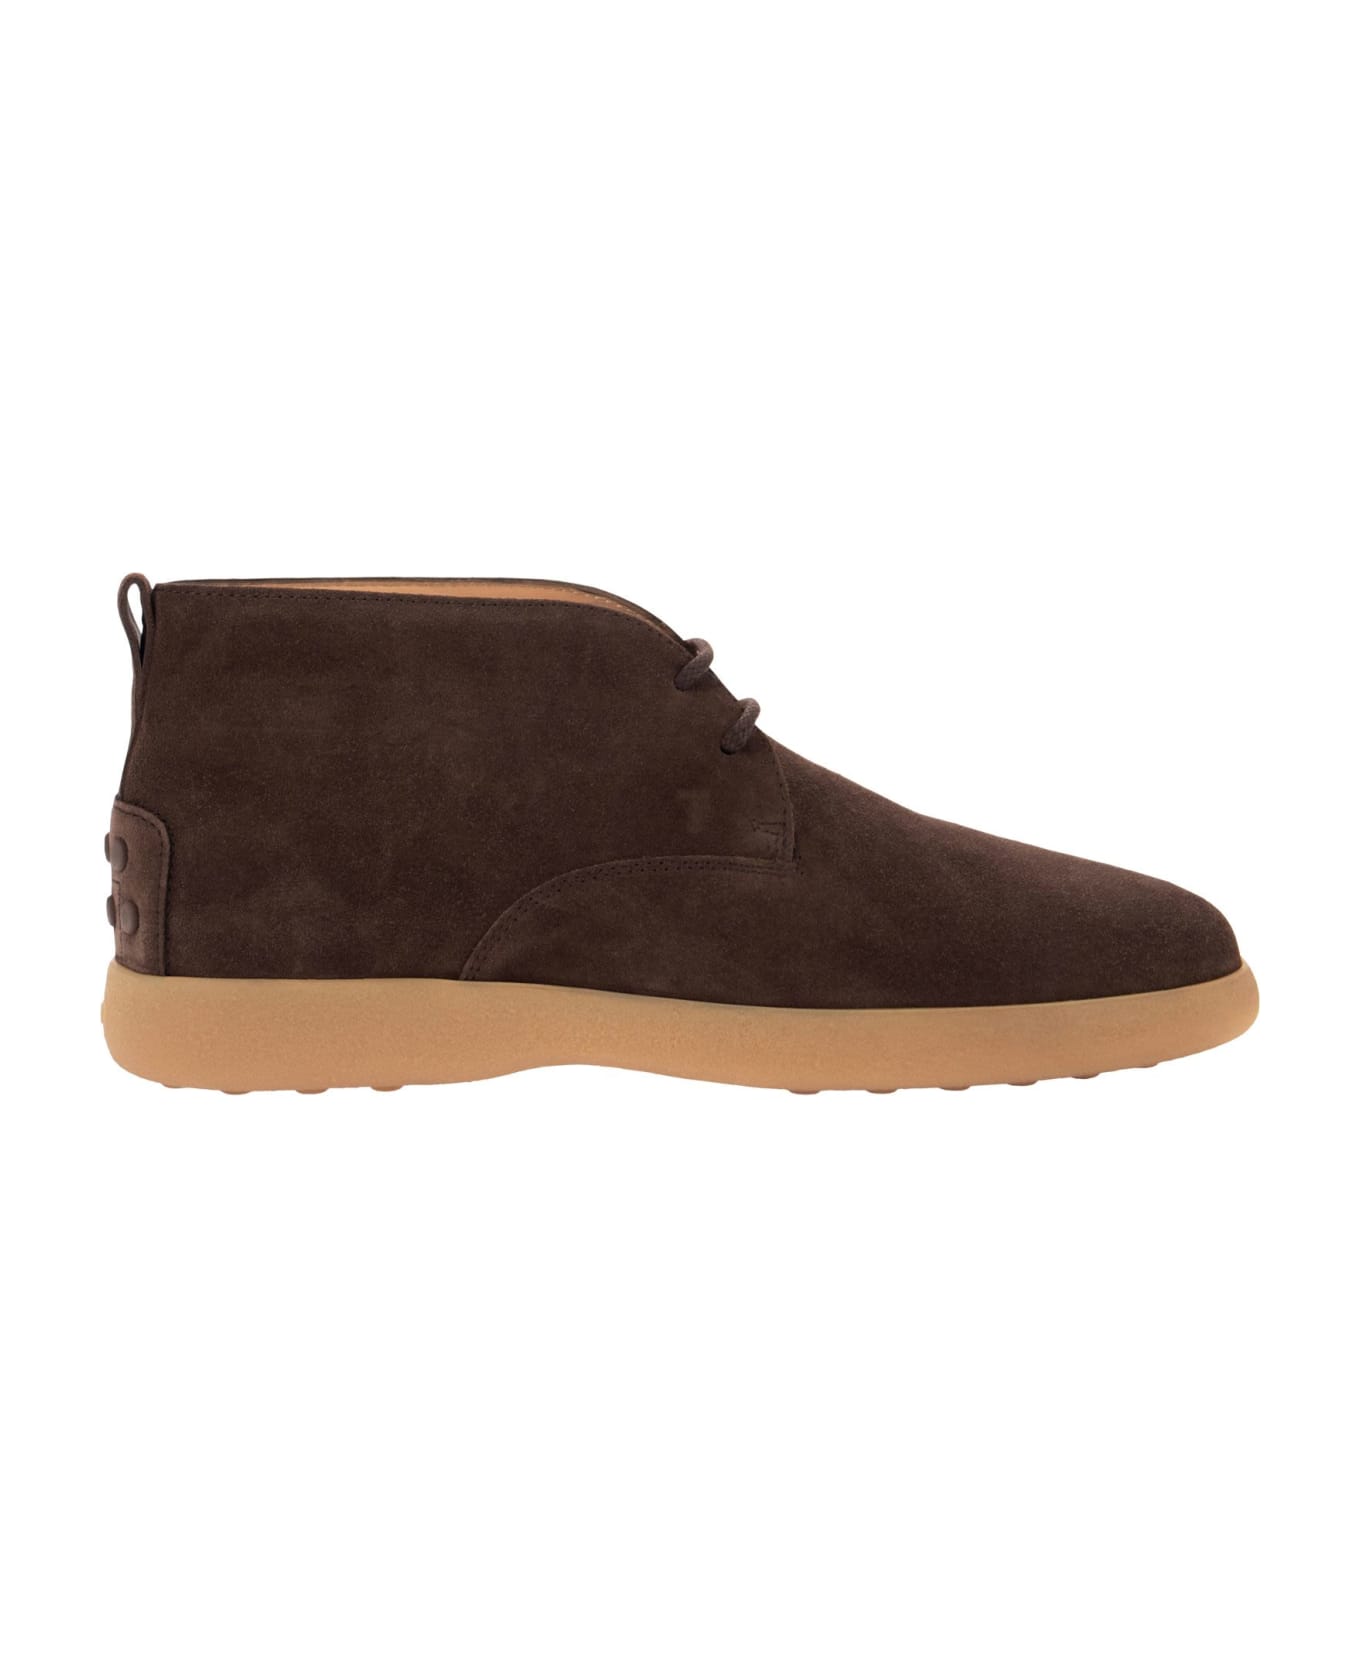 Tod's Suede Leather Boots - Brown ブーツ